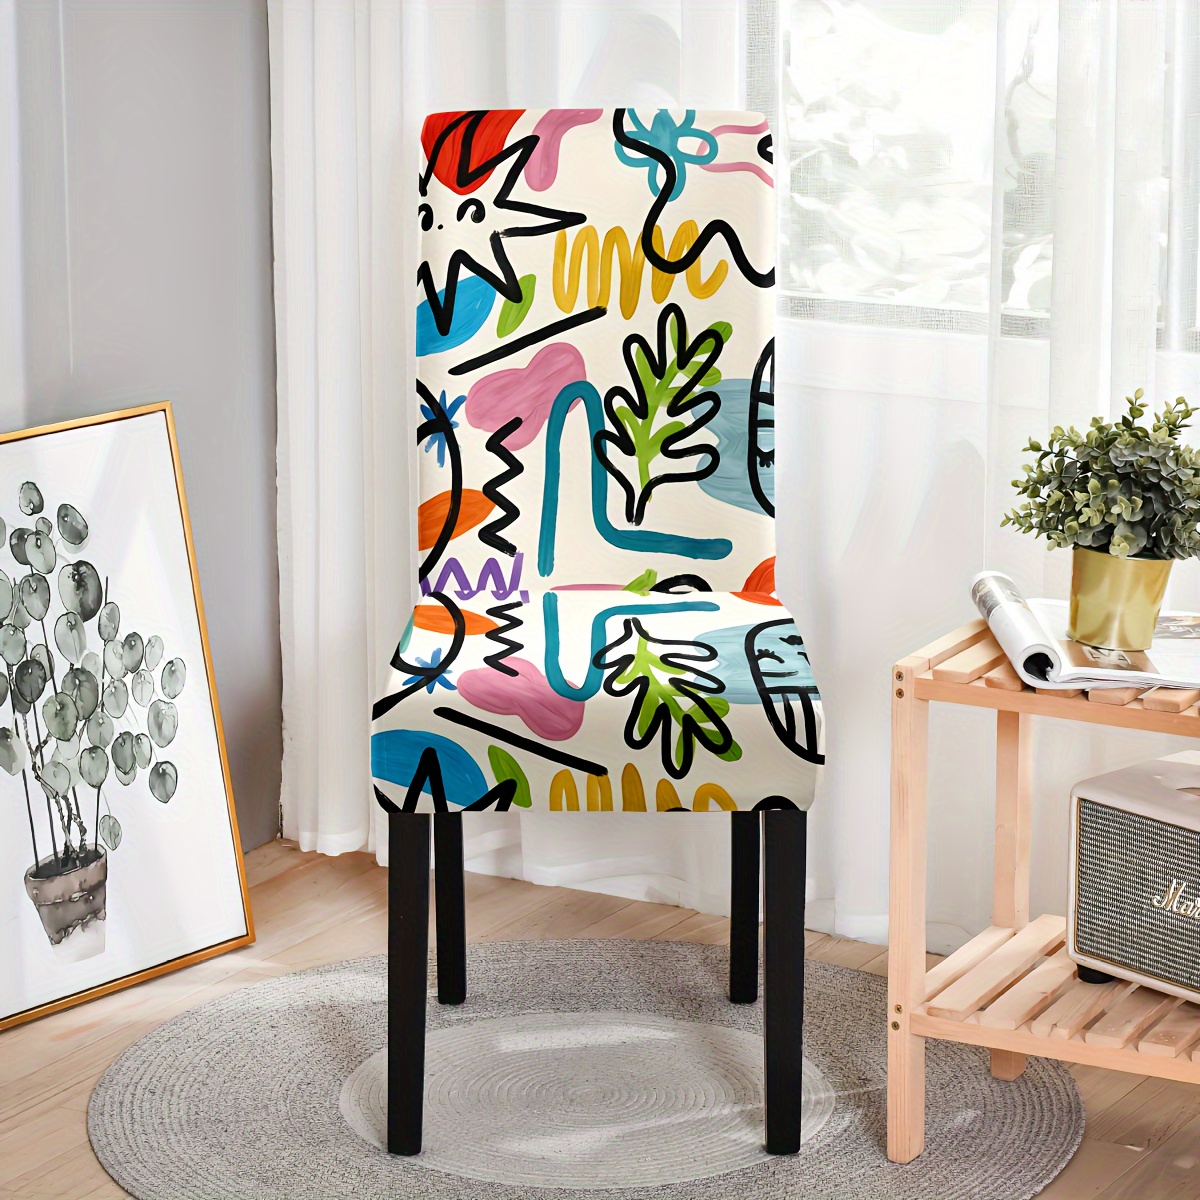 

4/6-piece Colorful Graffiti Dining Chair Covers - Elastic, Washable & Replaceable Slipcovers Toward Home Decor - Perfect Toward Dining, Kitchen, Office, And Living Spaces